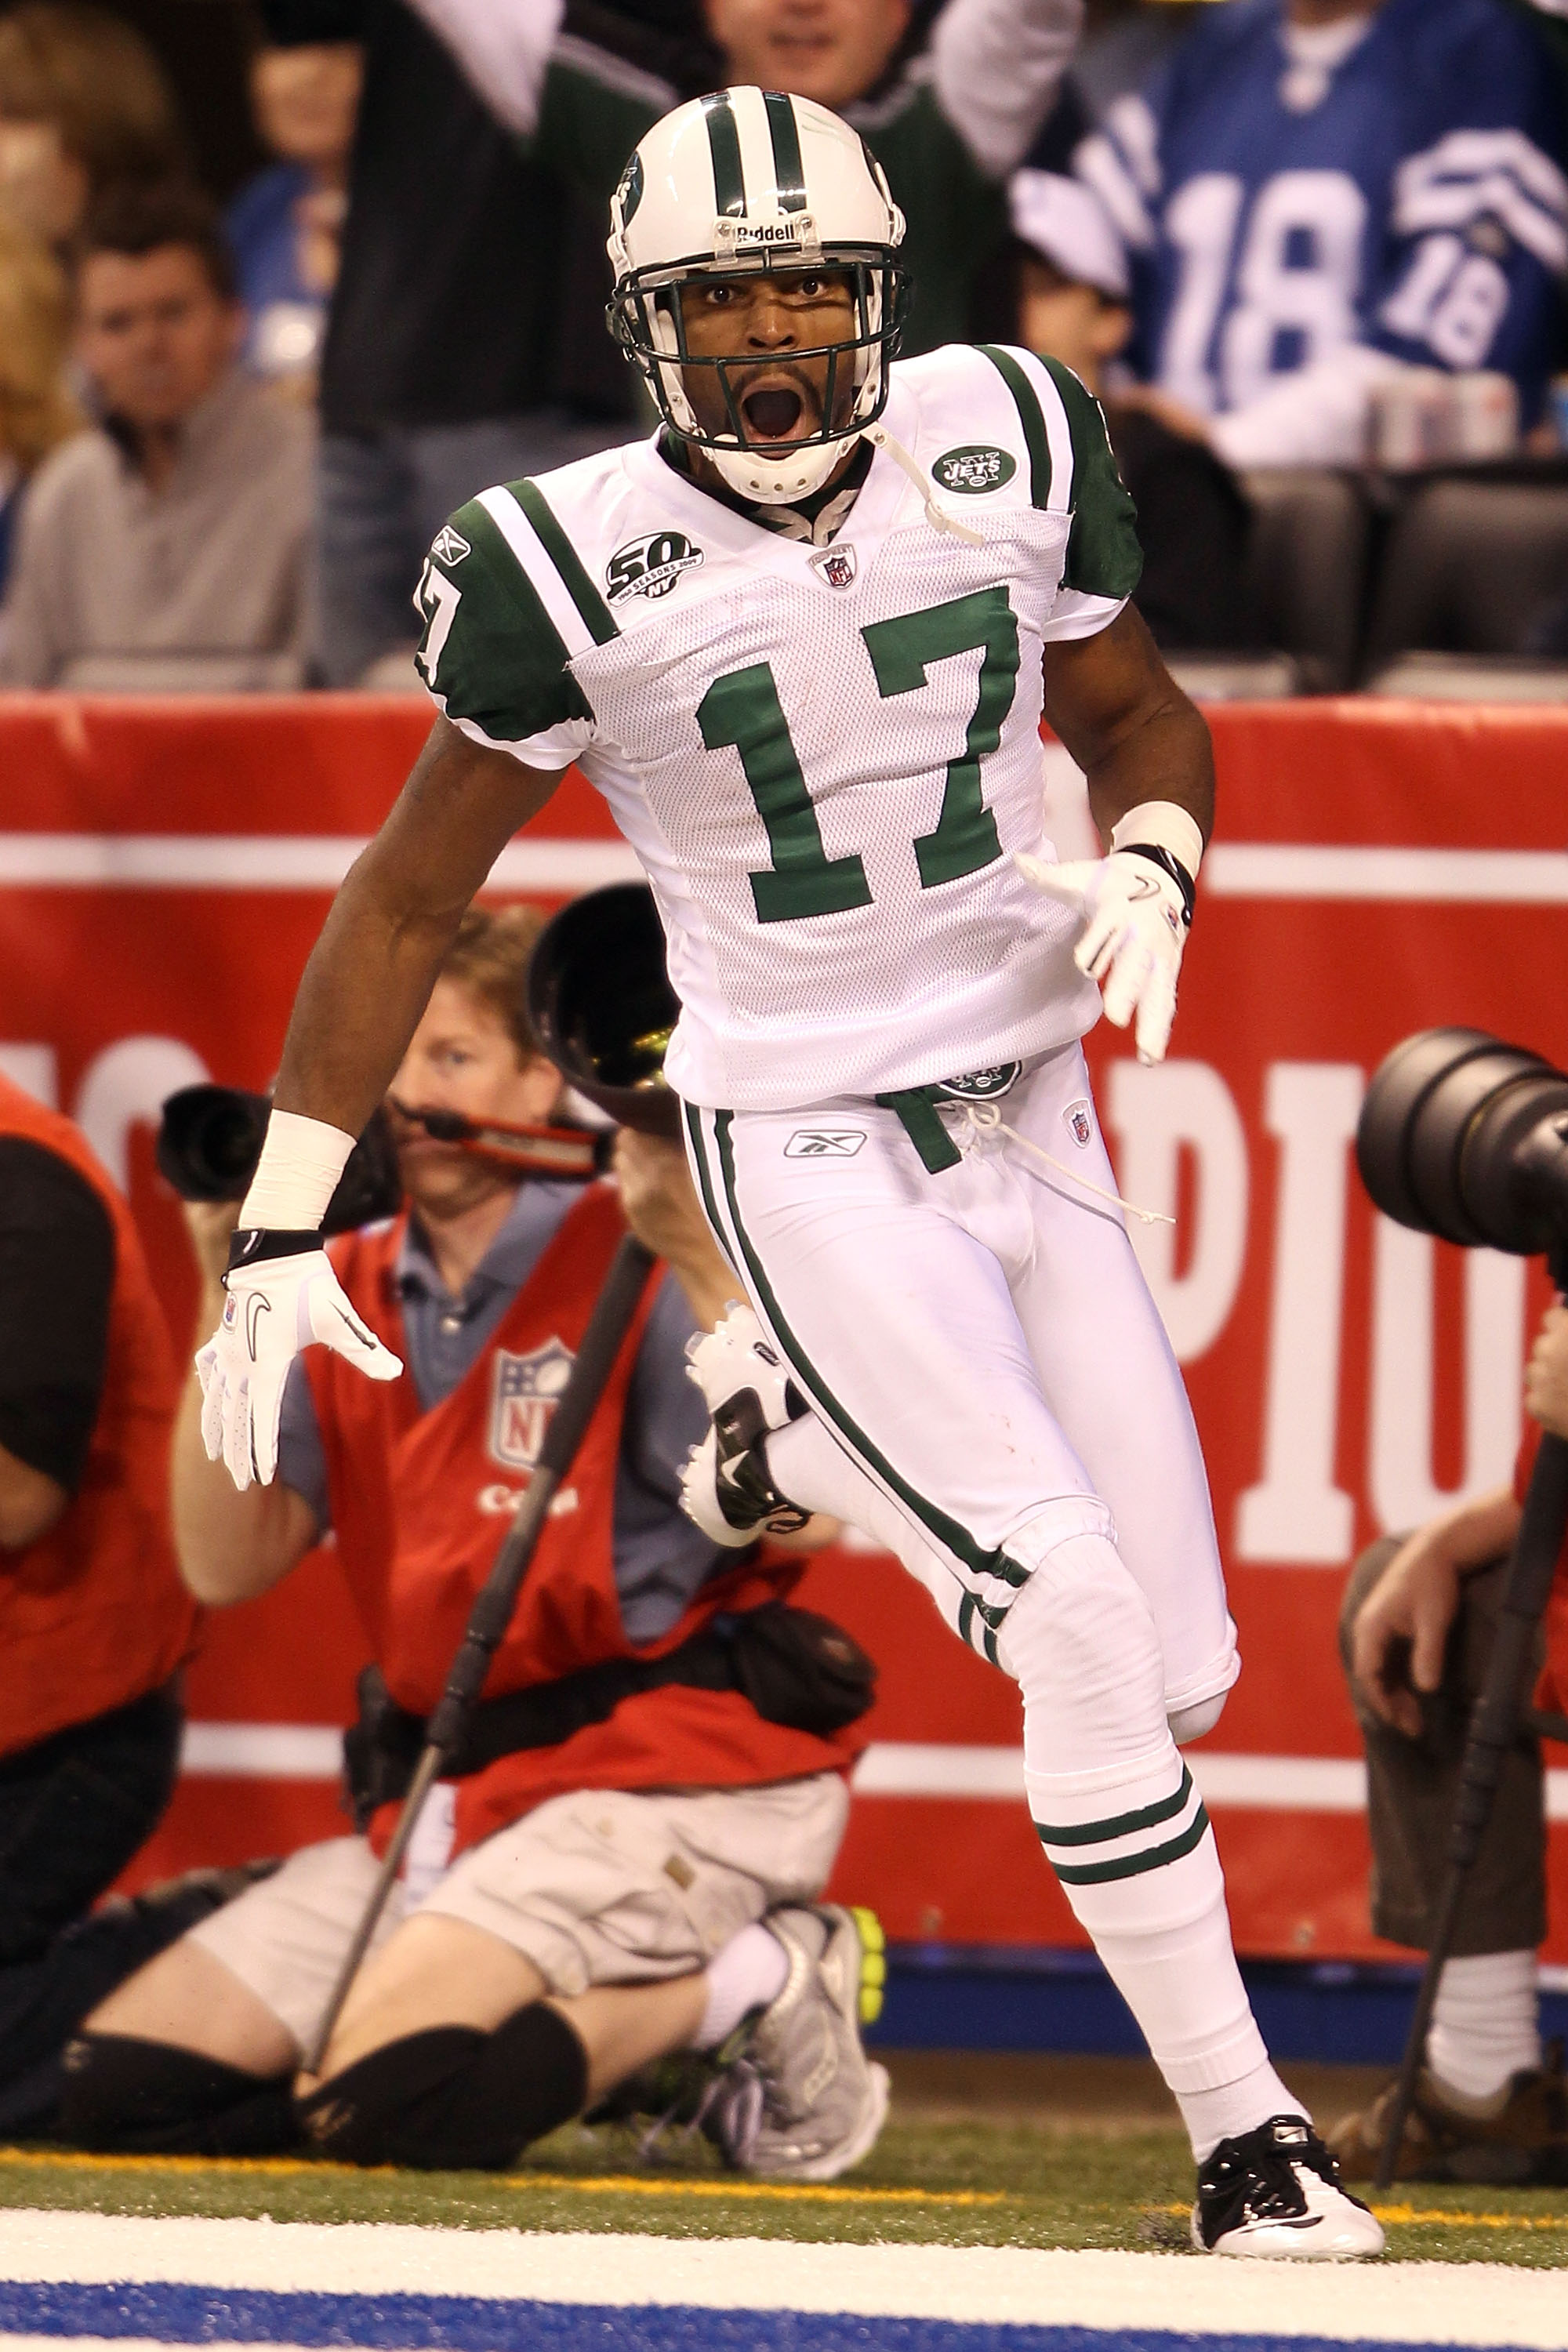 INDIANAPOLIS - JANUARY 24:  Wide receiver Braylon Edwards #17 of the New York Jets celebrates in the endzone after catching an 80-yard touchdown pass in the second quarter against the Indianapolis Colts during the AFC Championship Game at Lucas Oil Stadiu